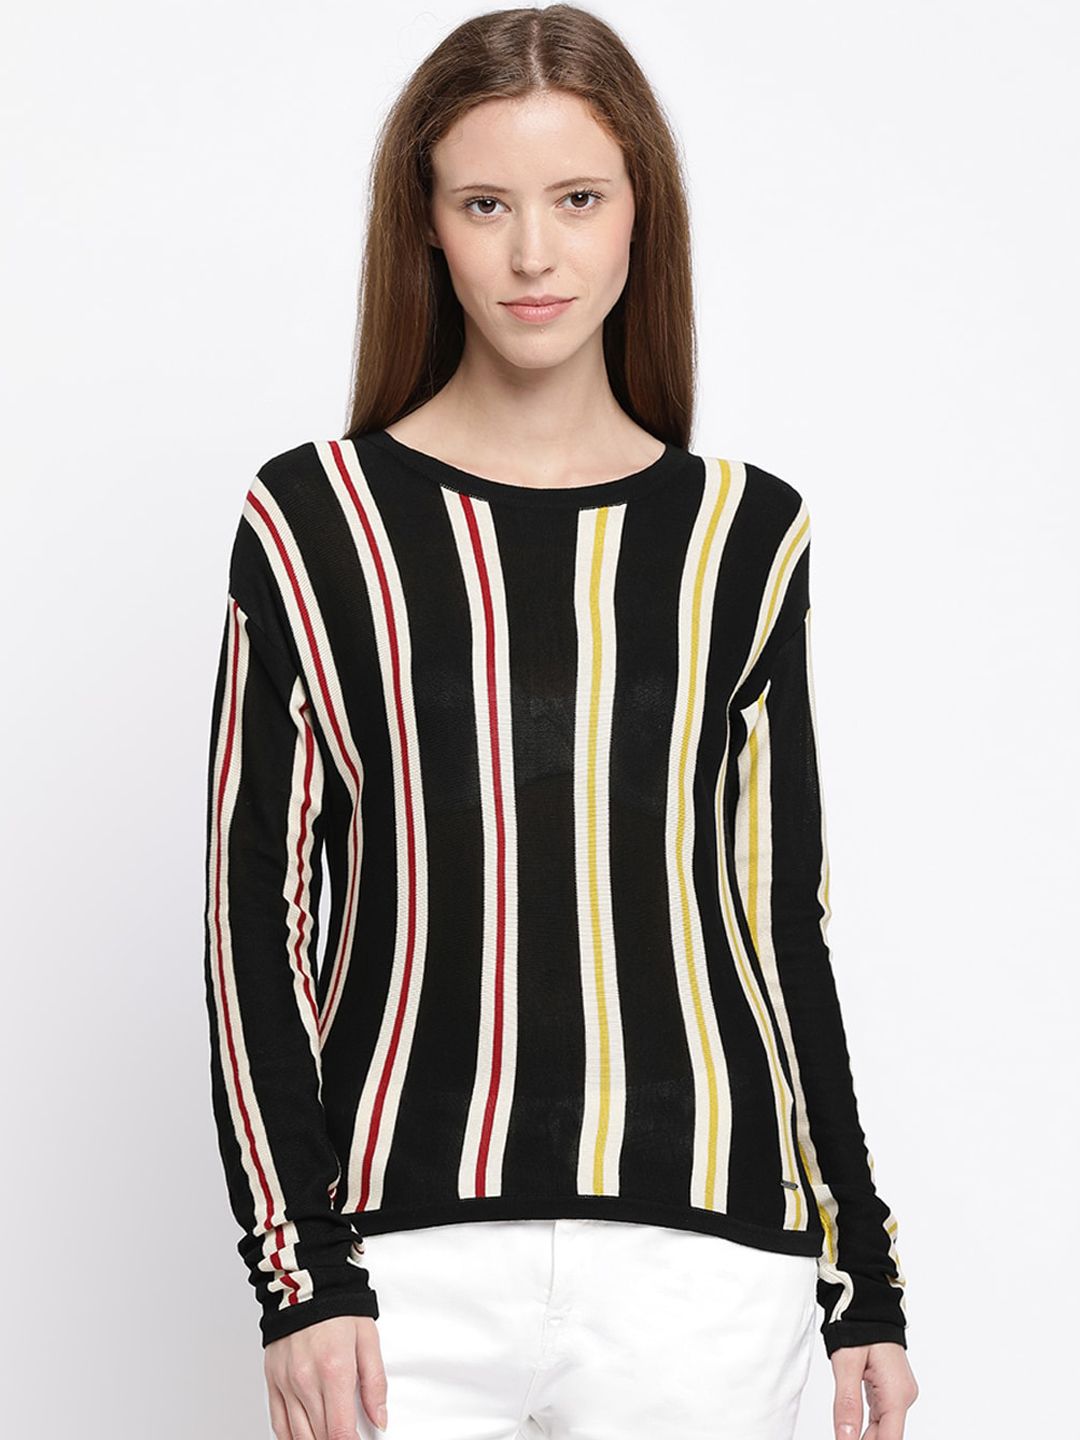 Pepe Jeans Women Black & White Striped Pullover Sweater Price in India